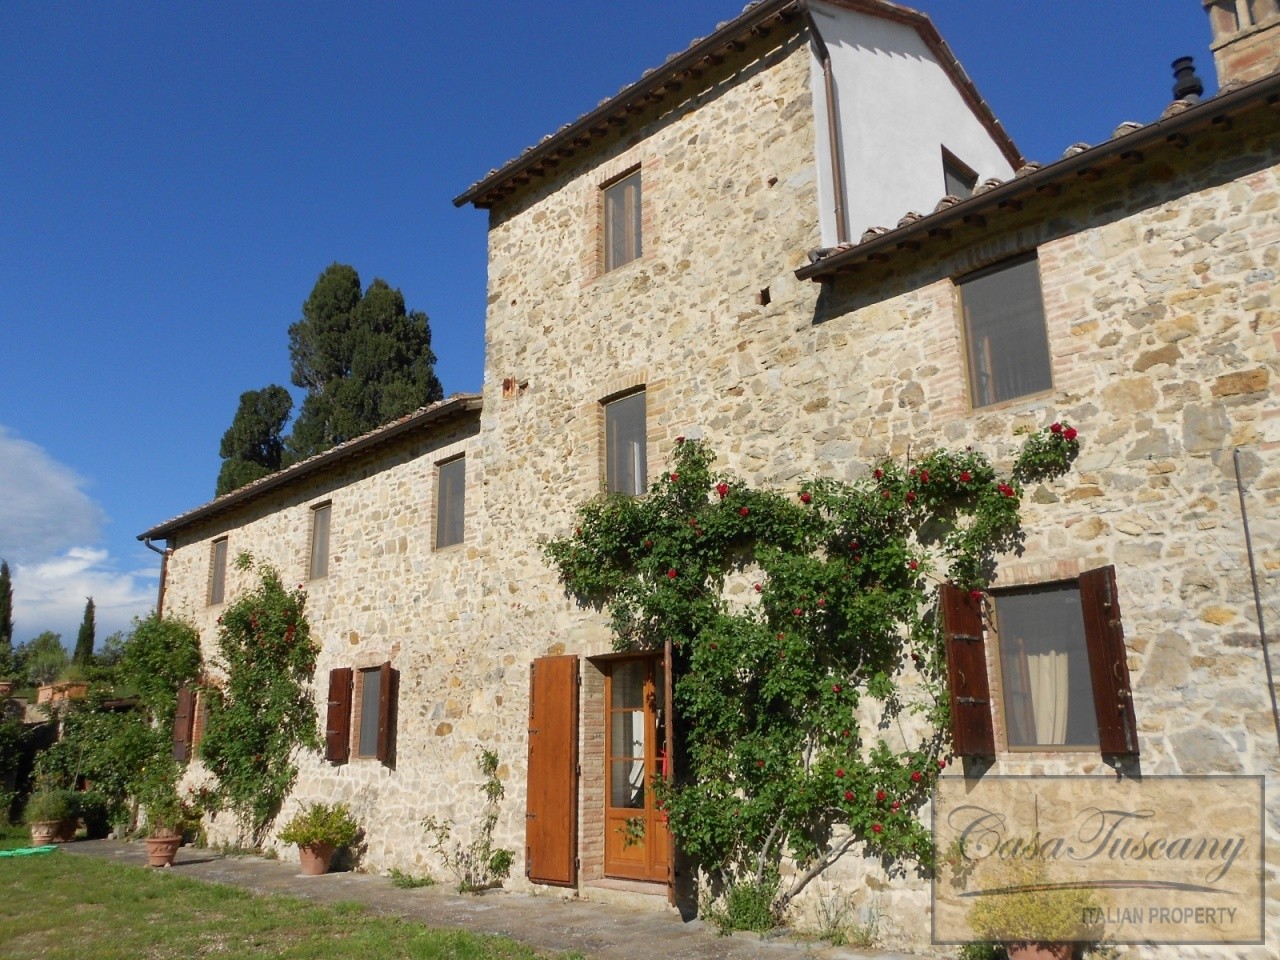 17th Century Chianti House with Annex + Olive Grove - Casa Tuscany